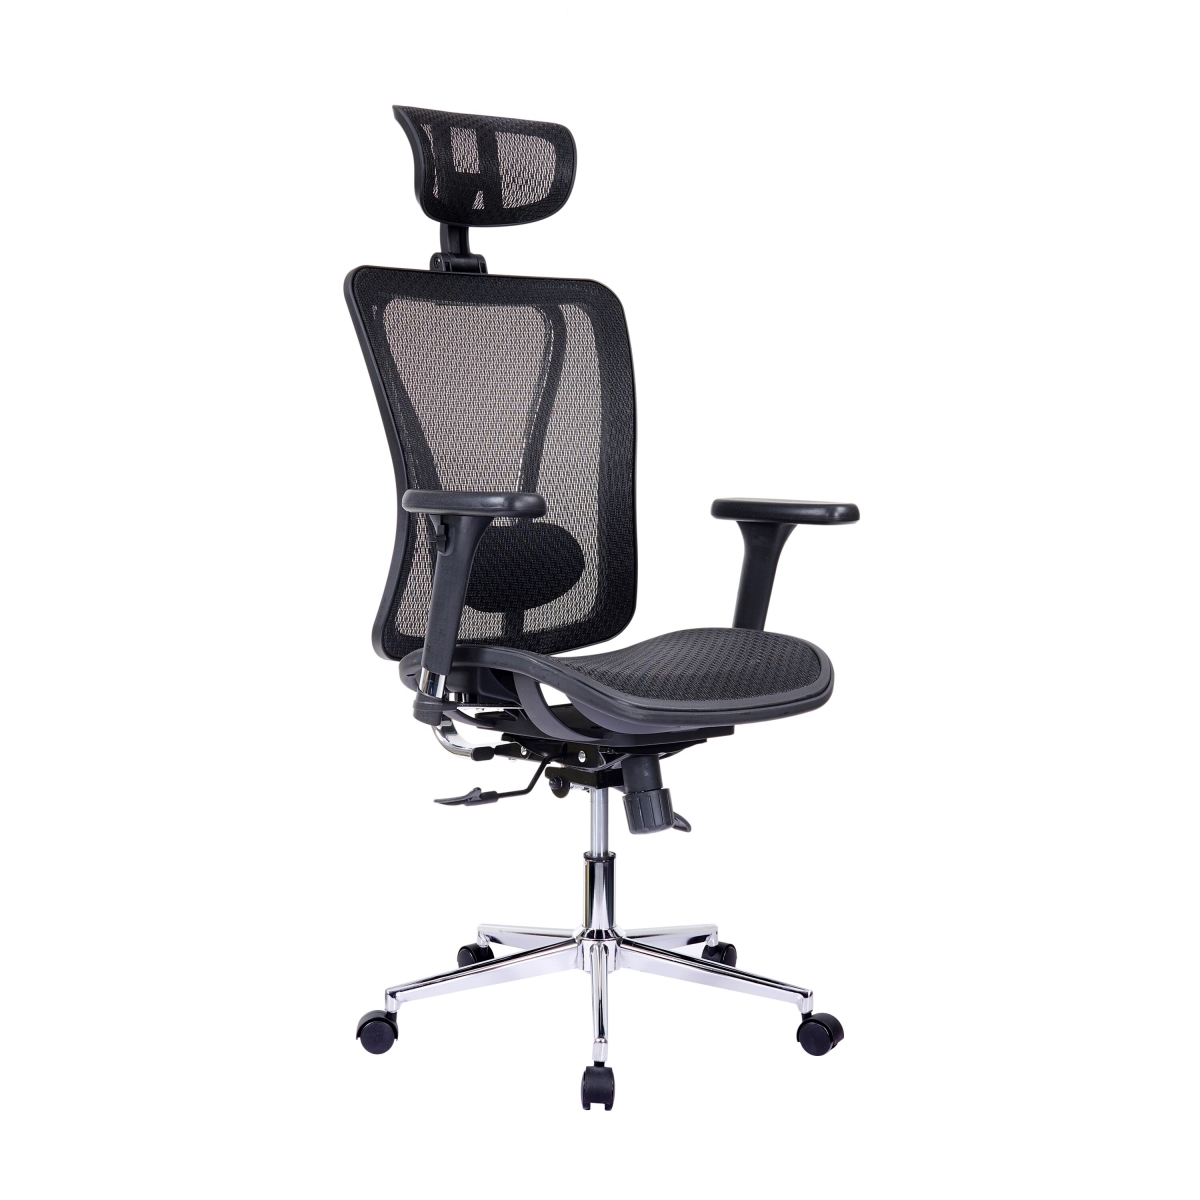 Rta-1009-bk High Back Executive Mesh Office Chair With Arms, Headrest & Lumbar Support, Black - 24.5 X 26.5 X 40.25 In.